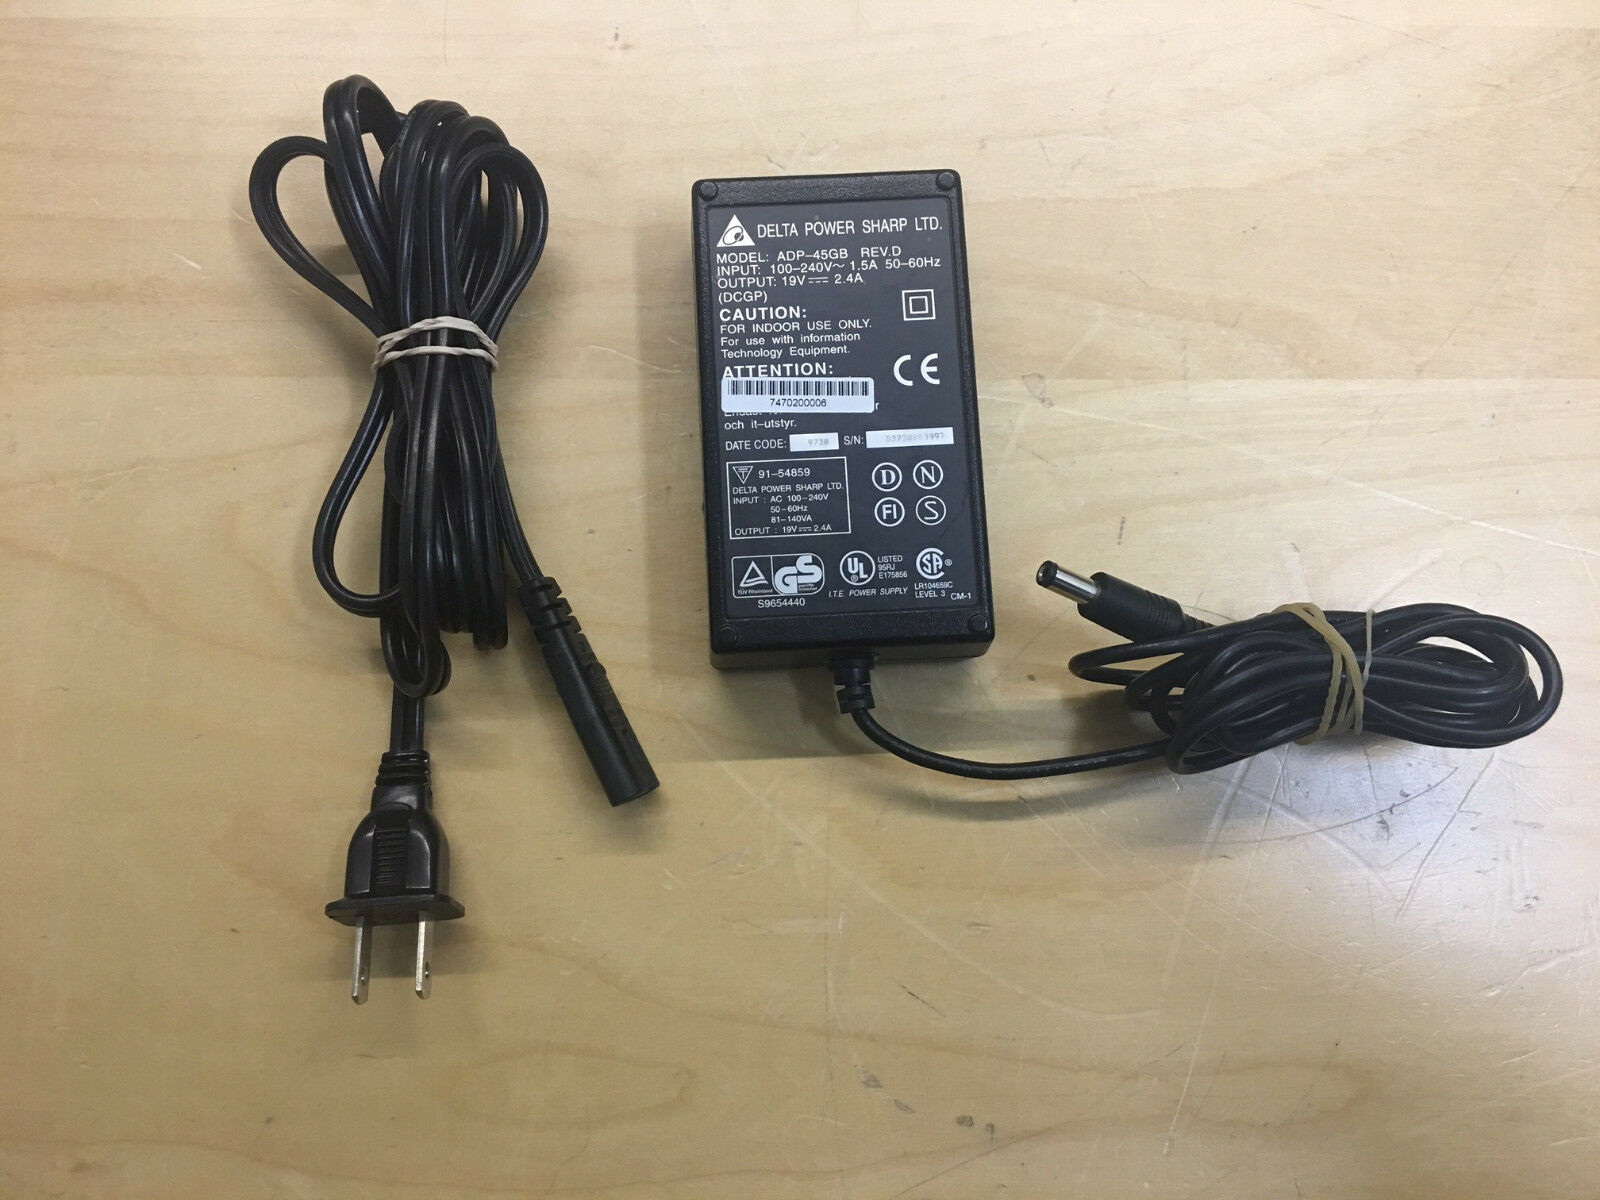 Delta Sharp ADP-45GB AC Adapter Power Supply Cord Cable Charger